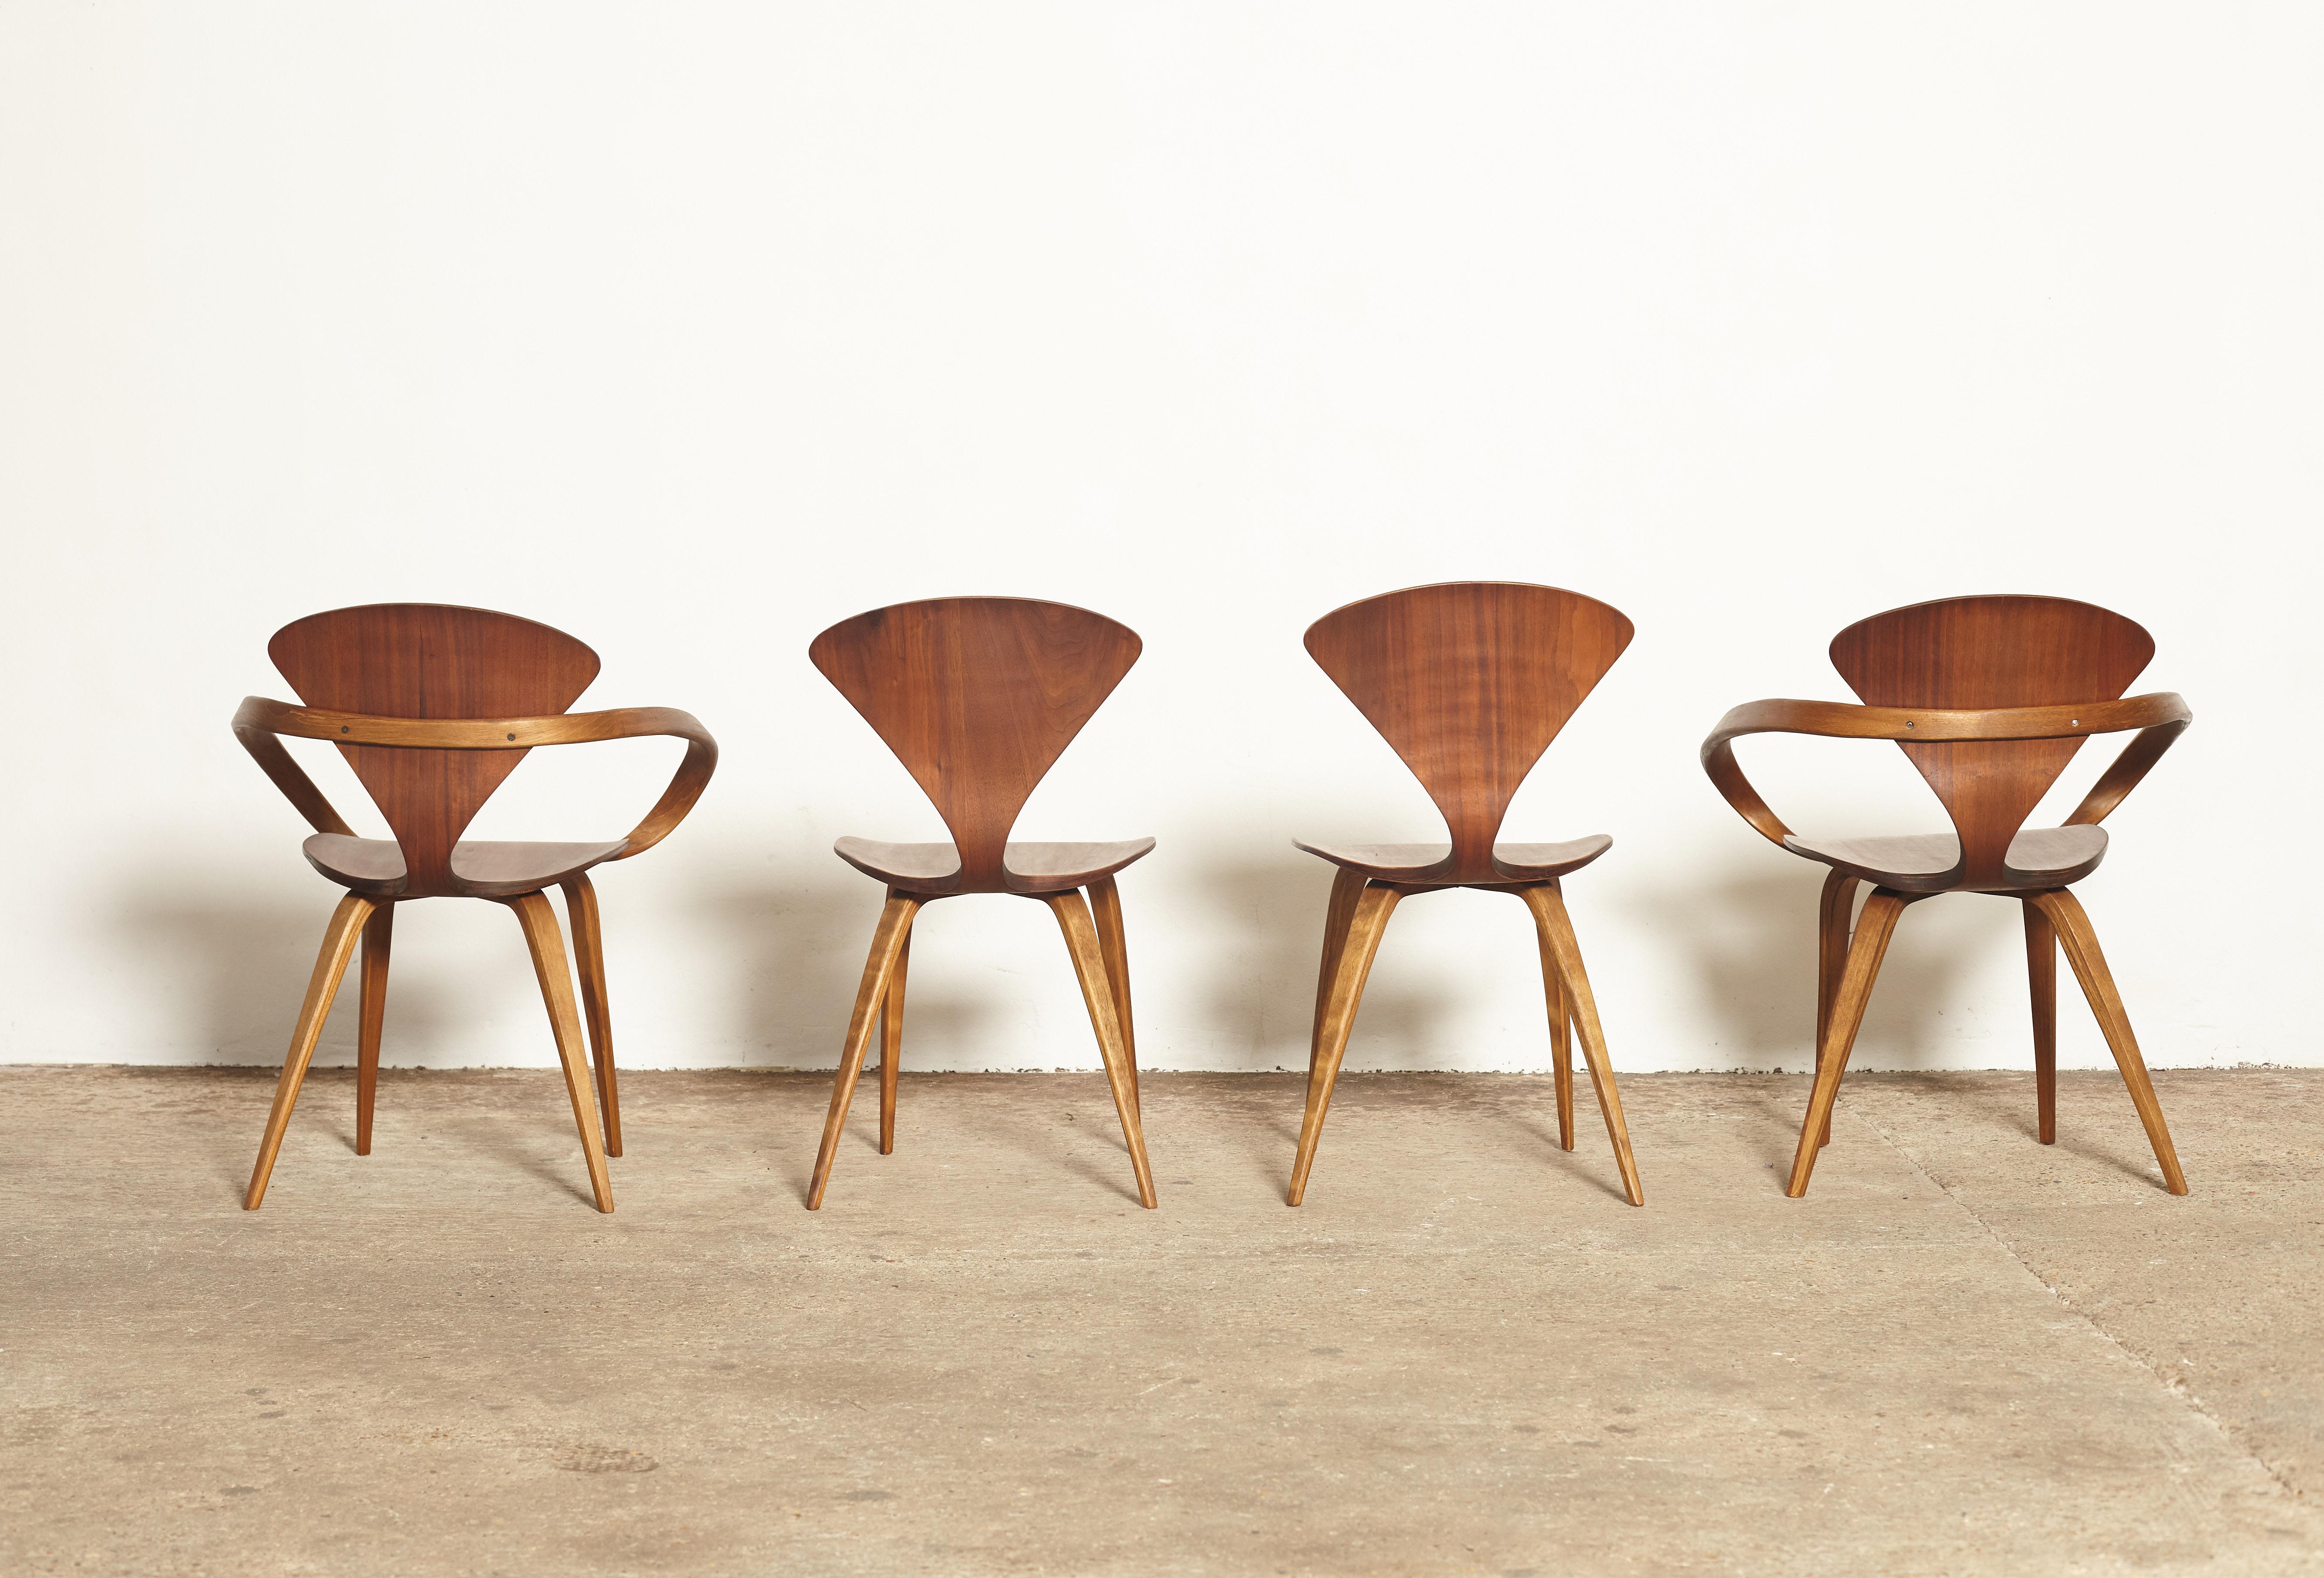 American Set of Four Norman Cherner Dining Chairs, Made by Plycraft, USA, 1960s